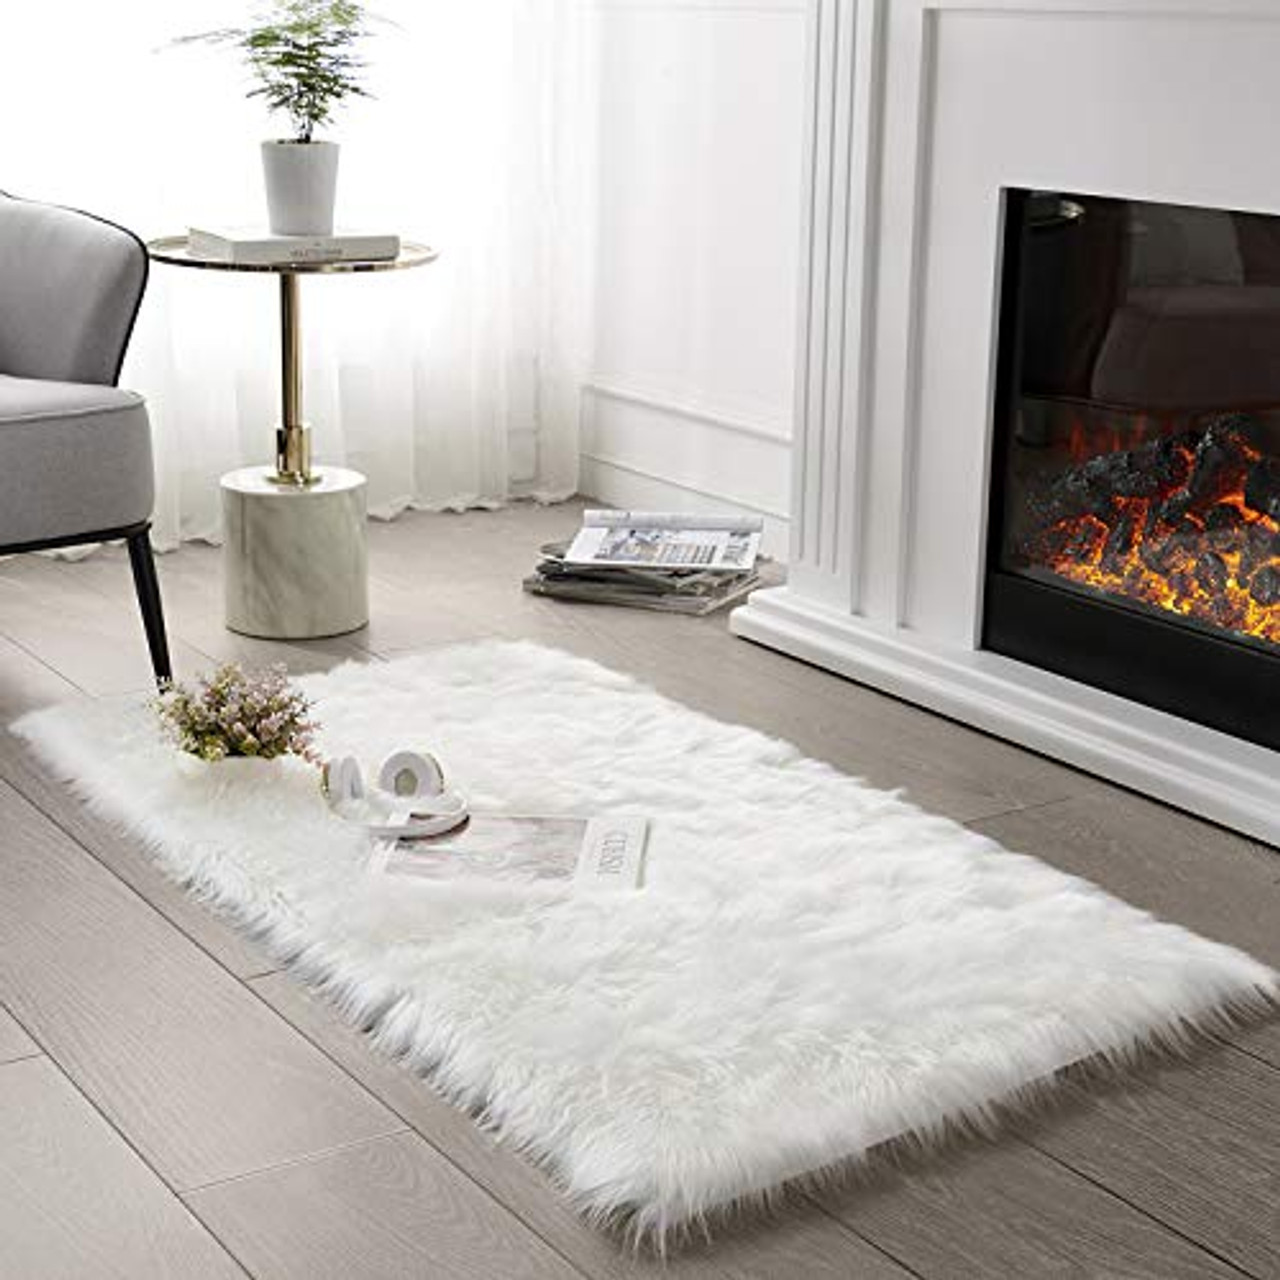 Super Soft White Fluffy Rug Faux Fur Area Rug Fuzzy Carpe Fur Rugs For Bedroom 